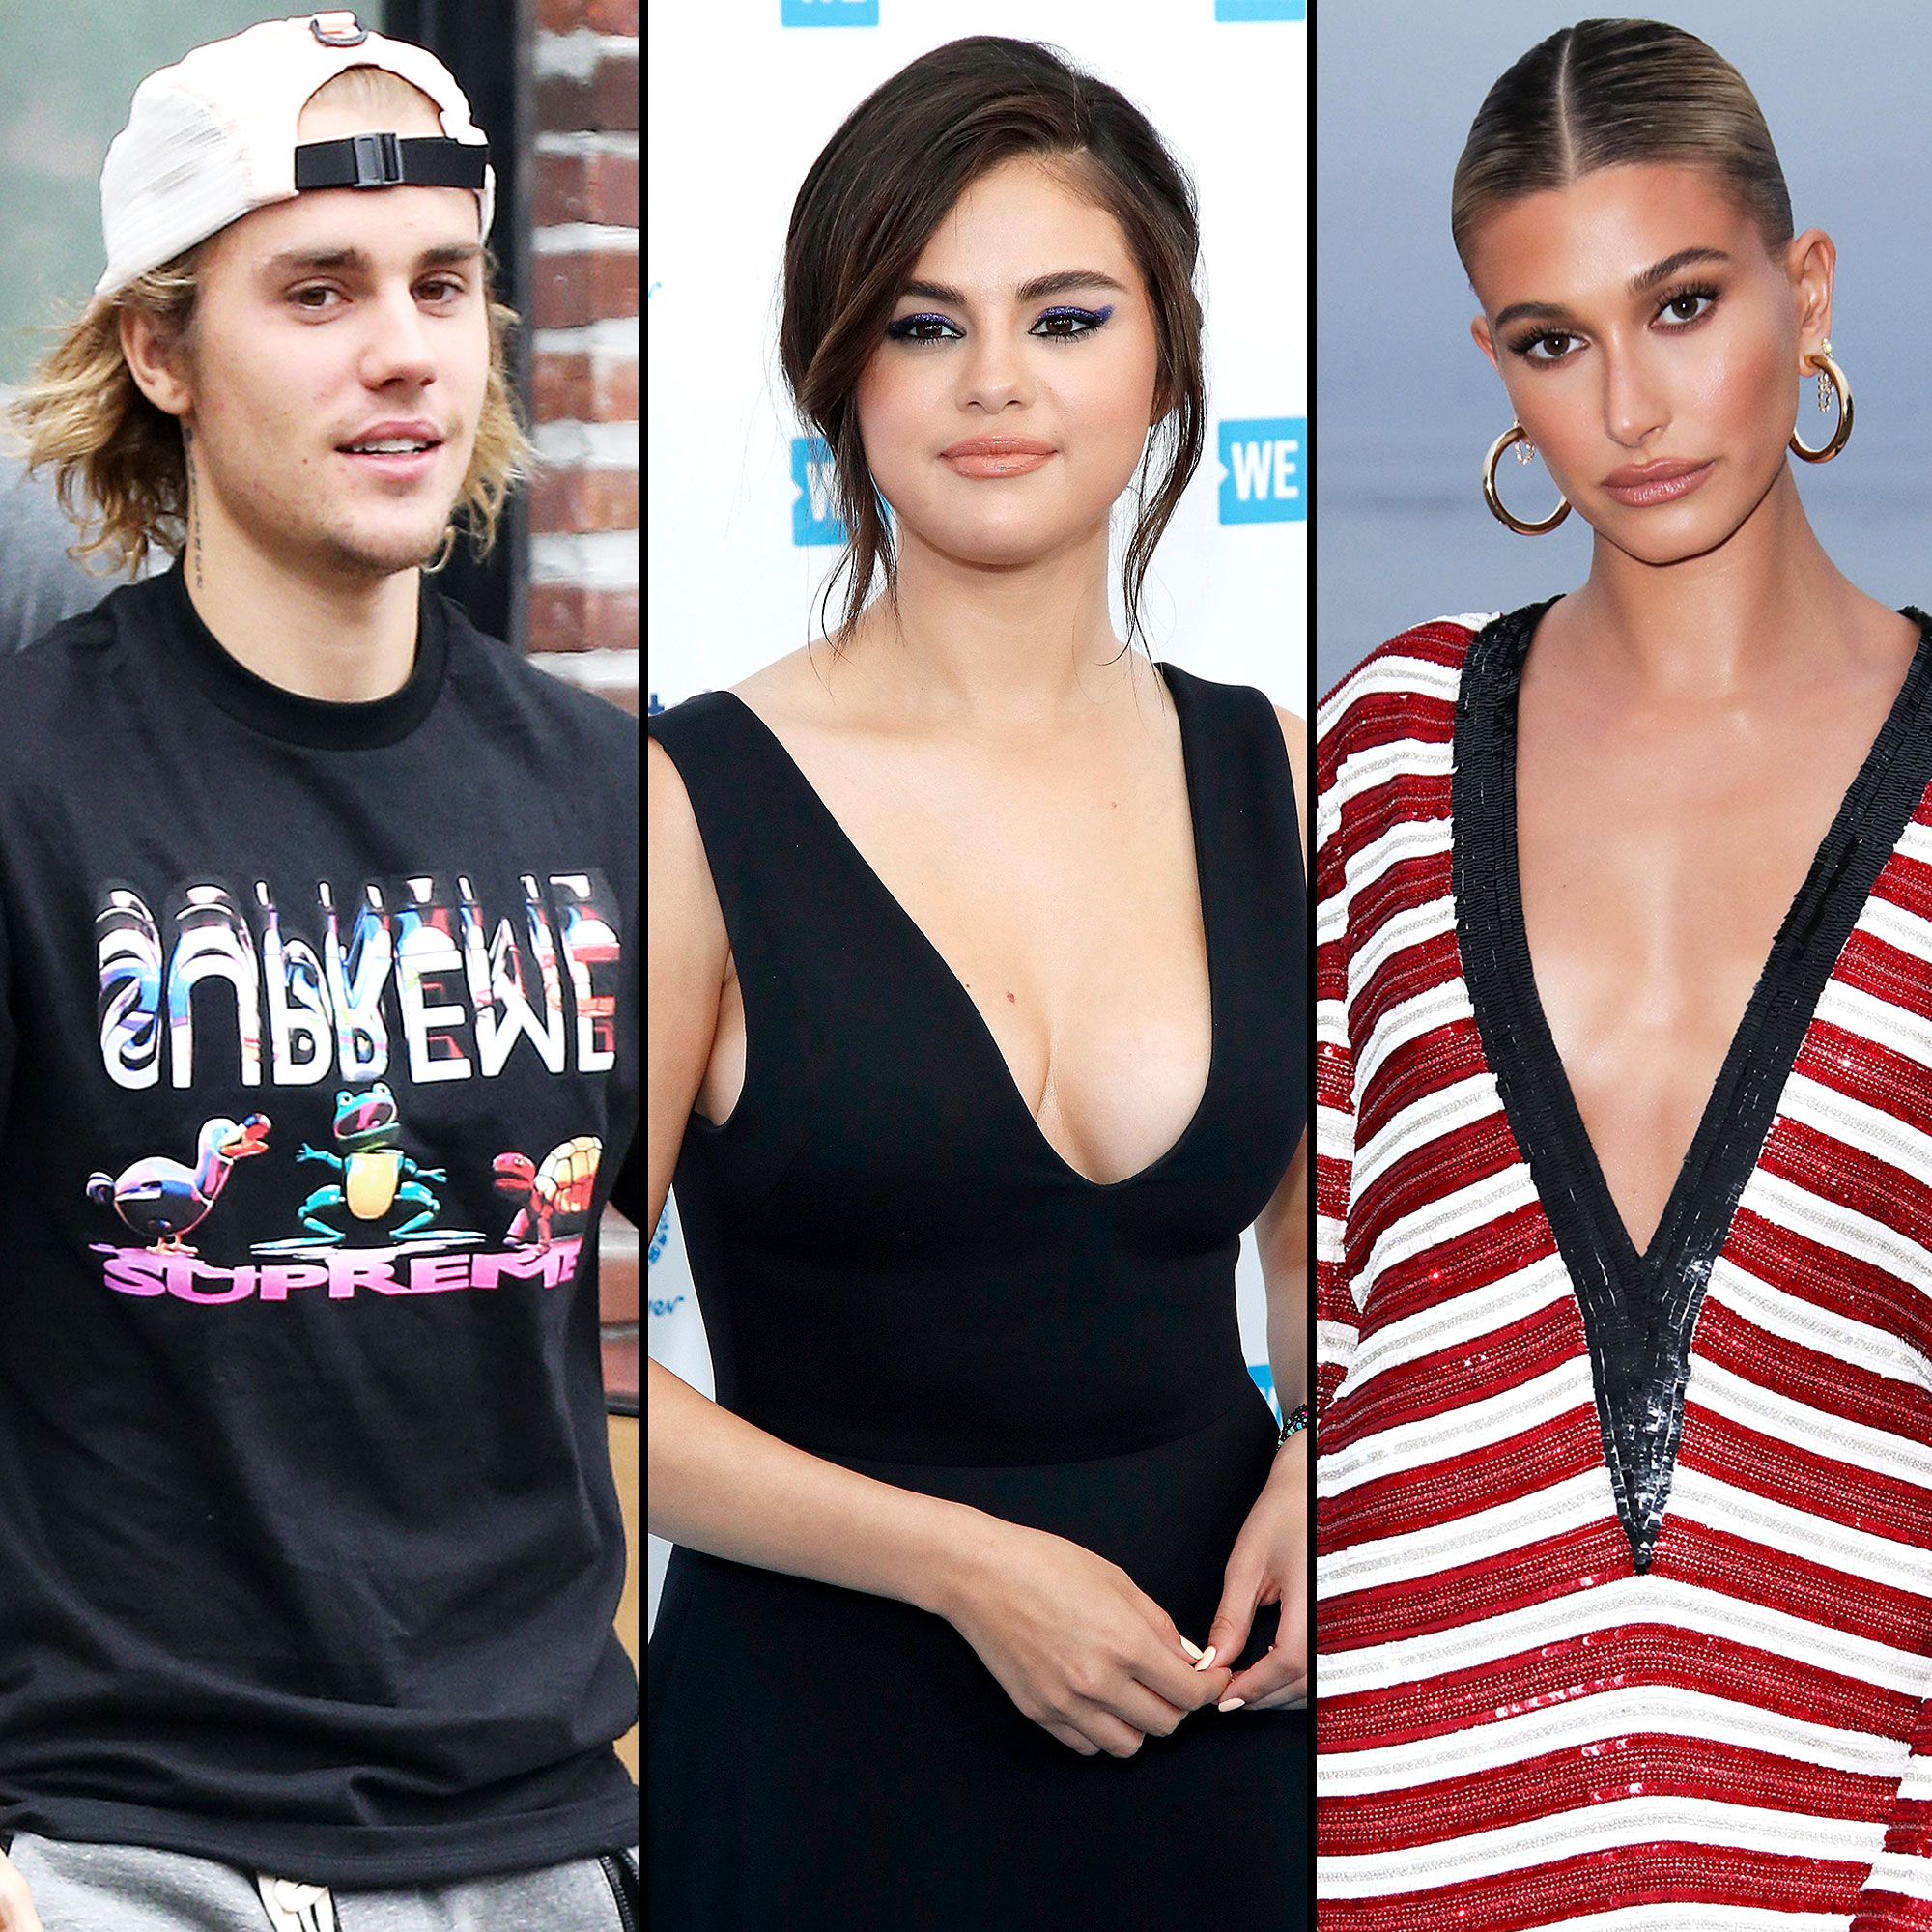 Hailey Bieber On If She Was With Justin Bieber When He Dated Selena Gomez